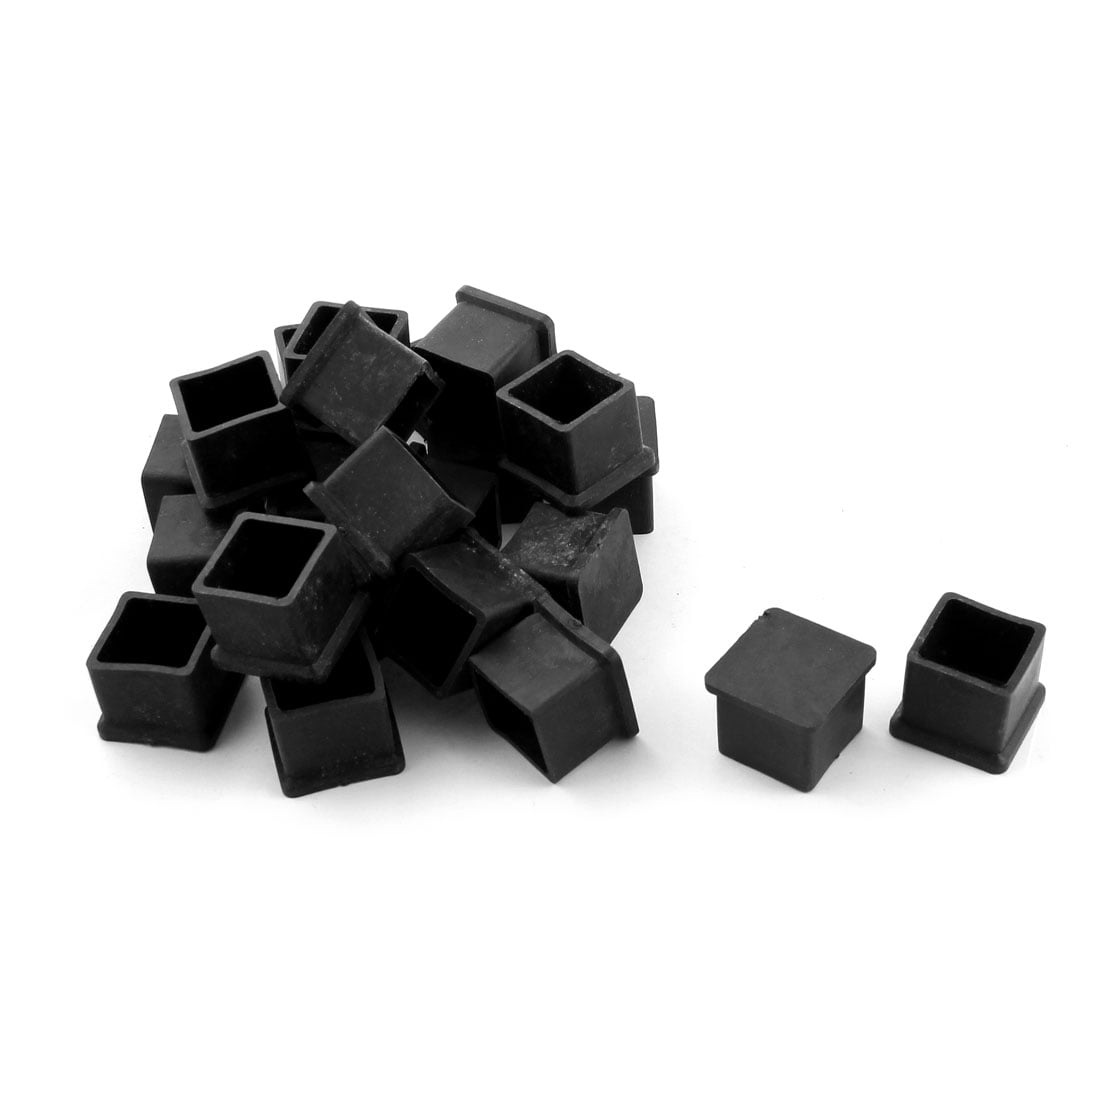 Details about   7 pcs 1.6" x 1.6" ~ Furniture Table Square Rubber Foot Covers Floor Protectors 